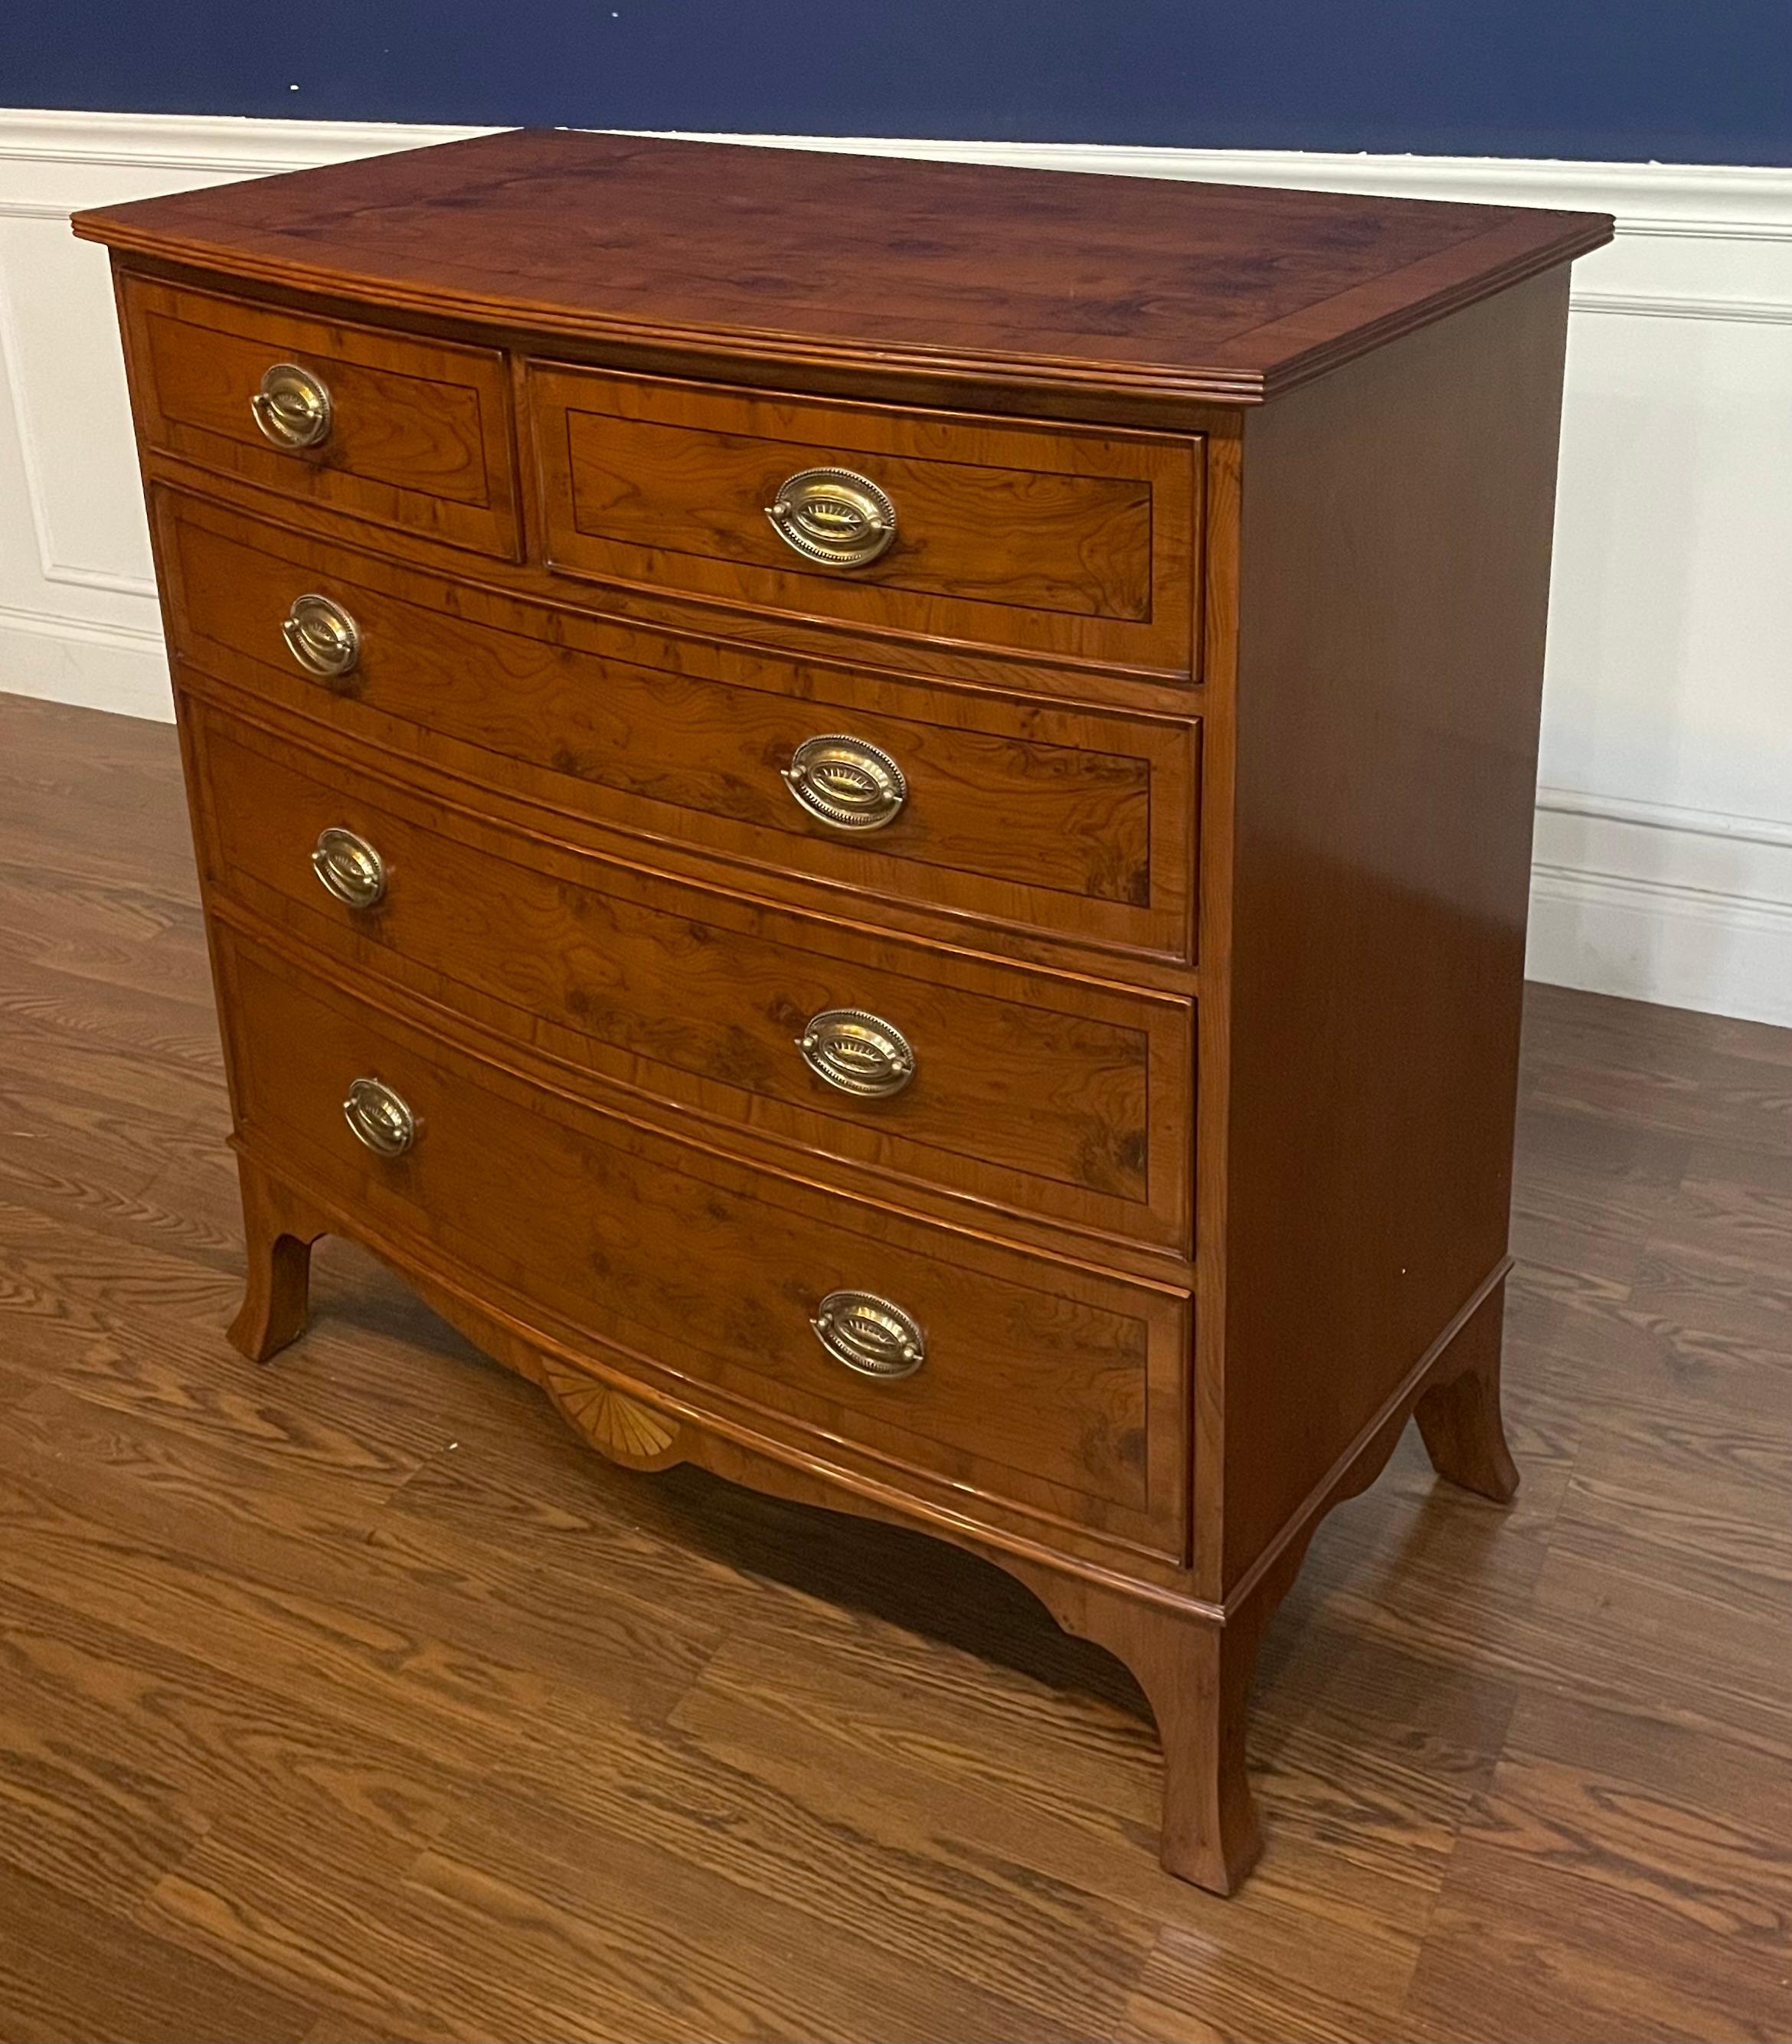 This is a classic Yew wood inlaid bow front chest by Leighton Hall. Its design was inspired by Adams style chests from the early 1800s. It features five drawers, solid brass hardware and faux key holes. The drawer fronts and top have Yew wood with